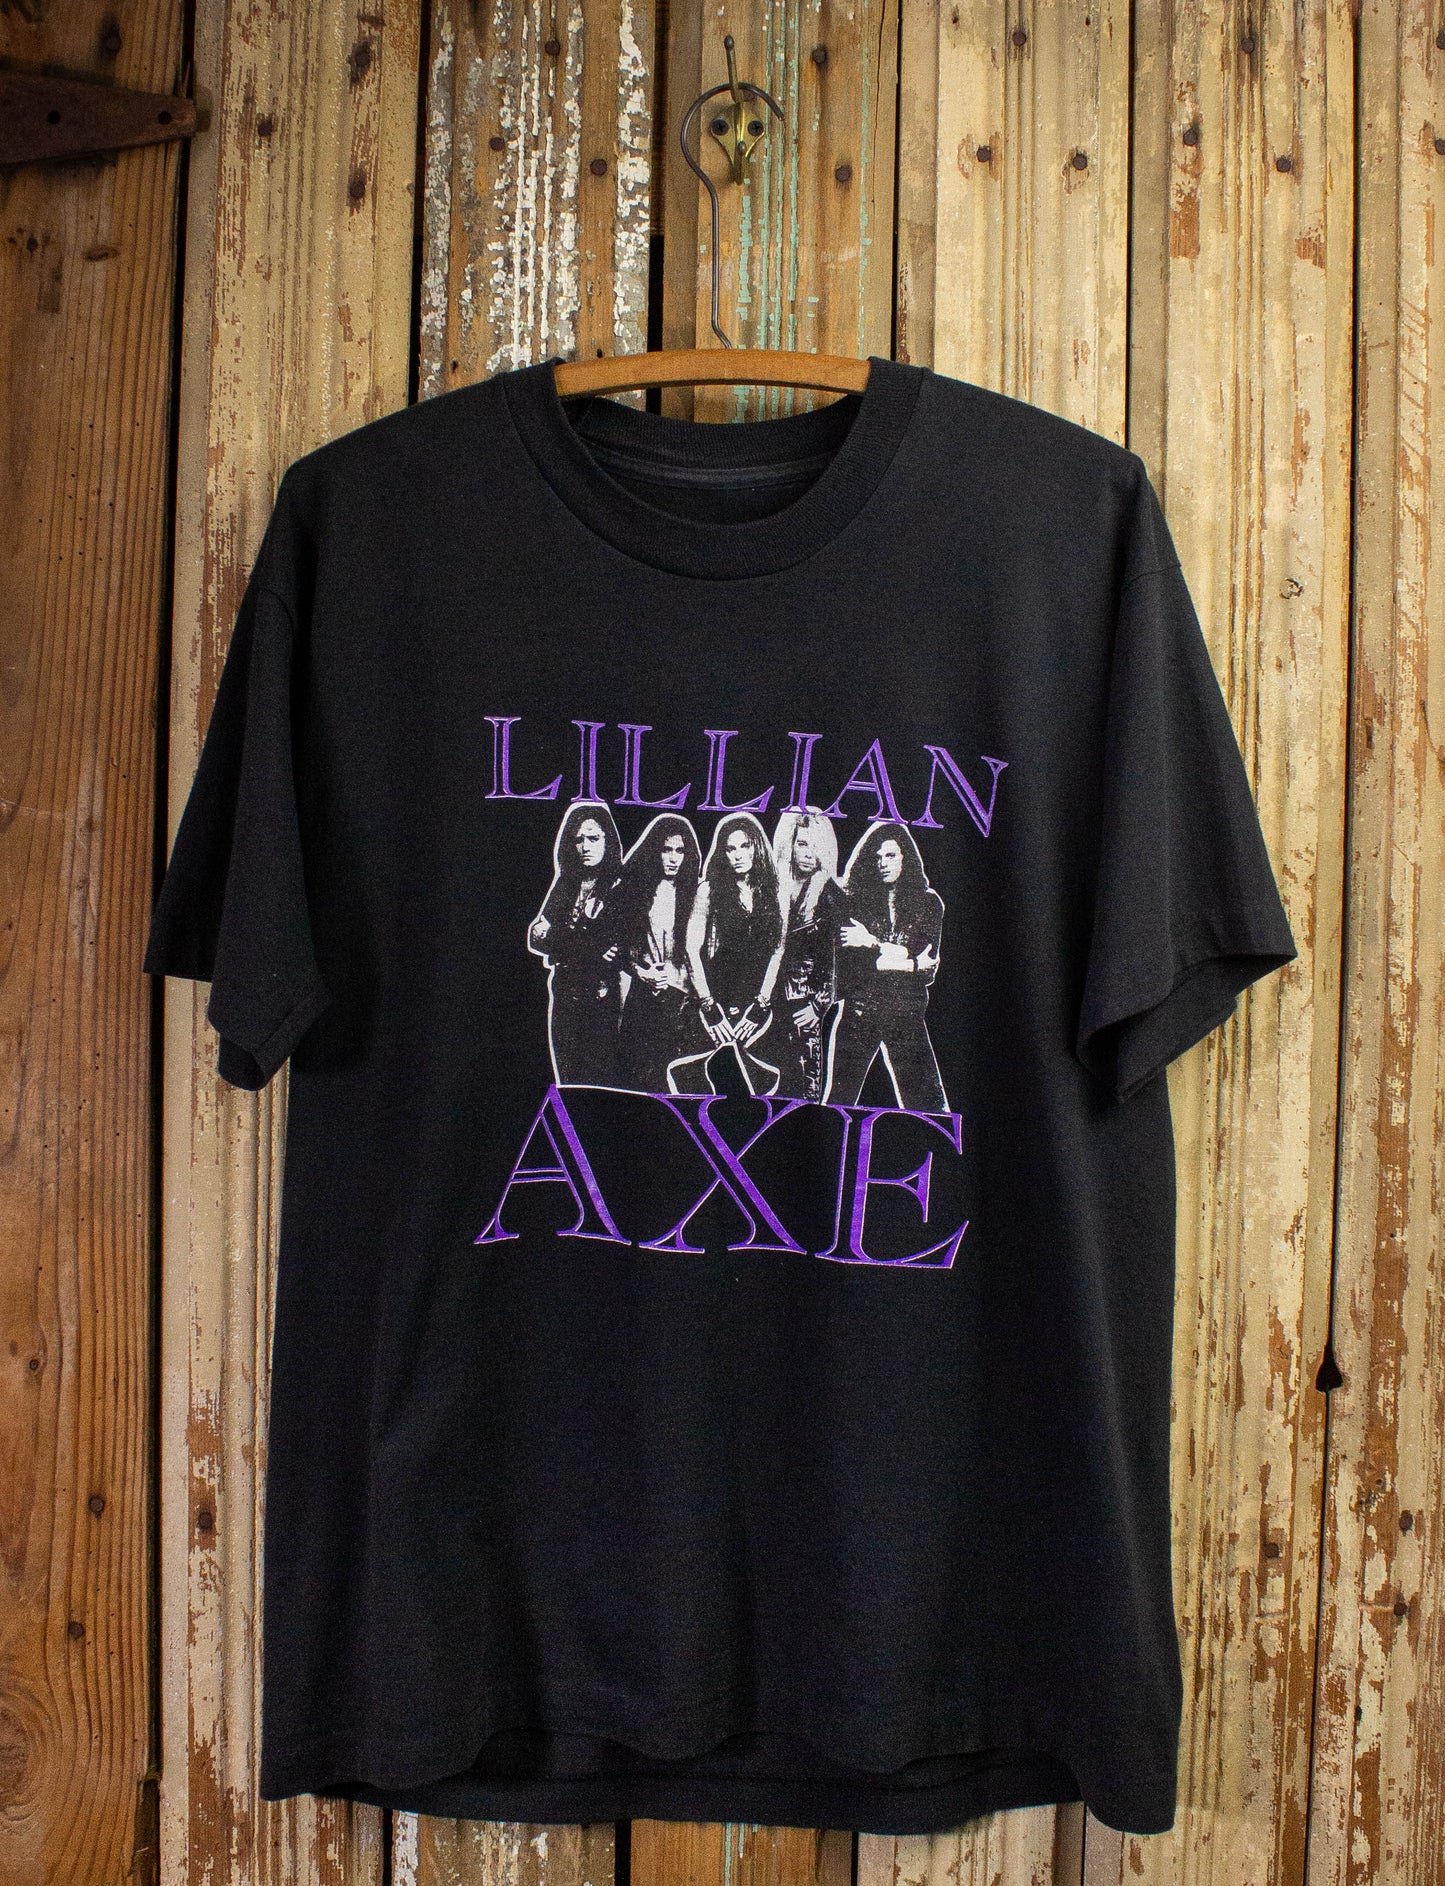 Vintage Lilian Axe Out Of The Darkness Concert T Shirt Black XL